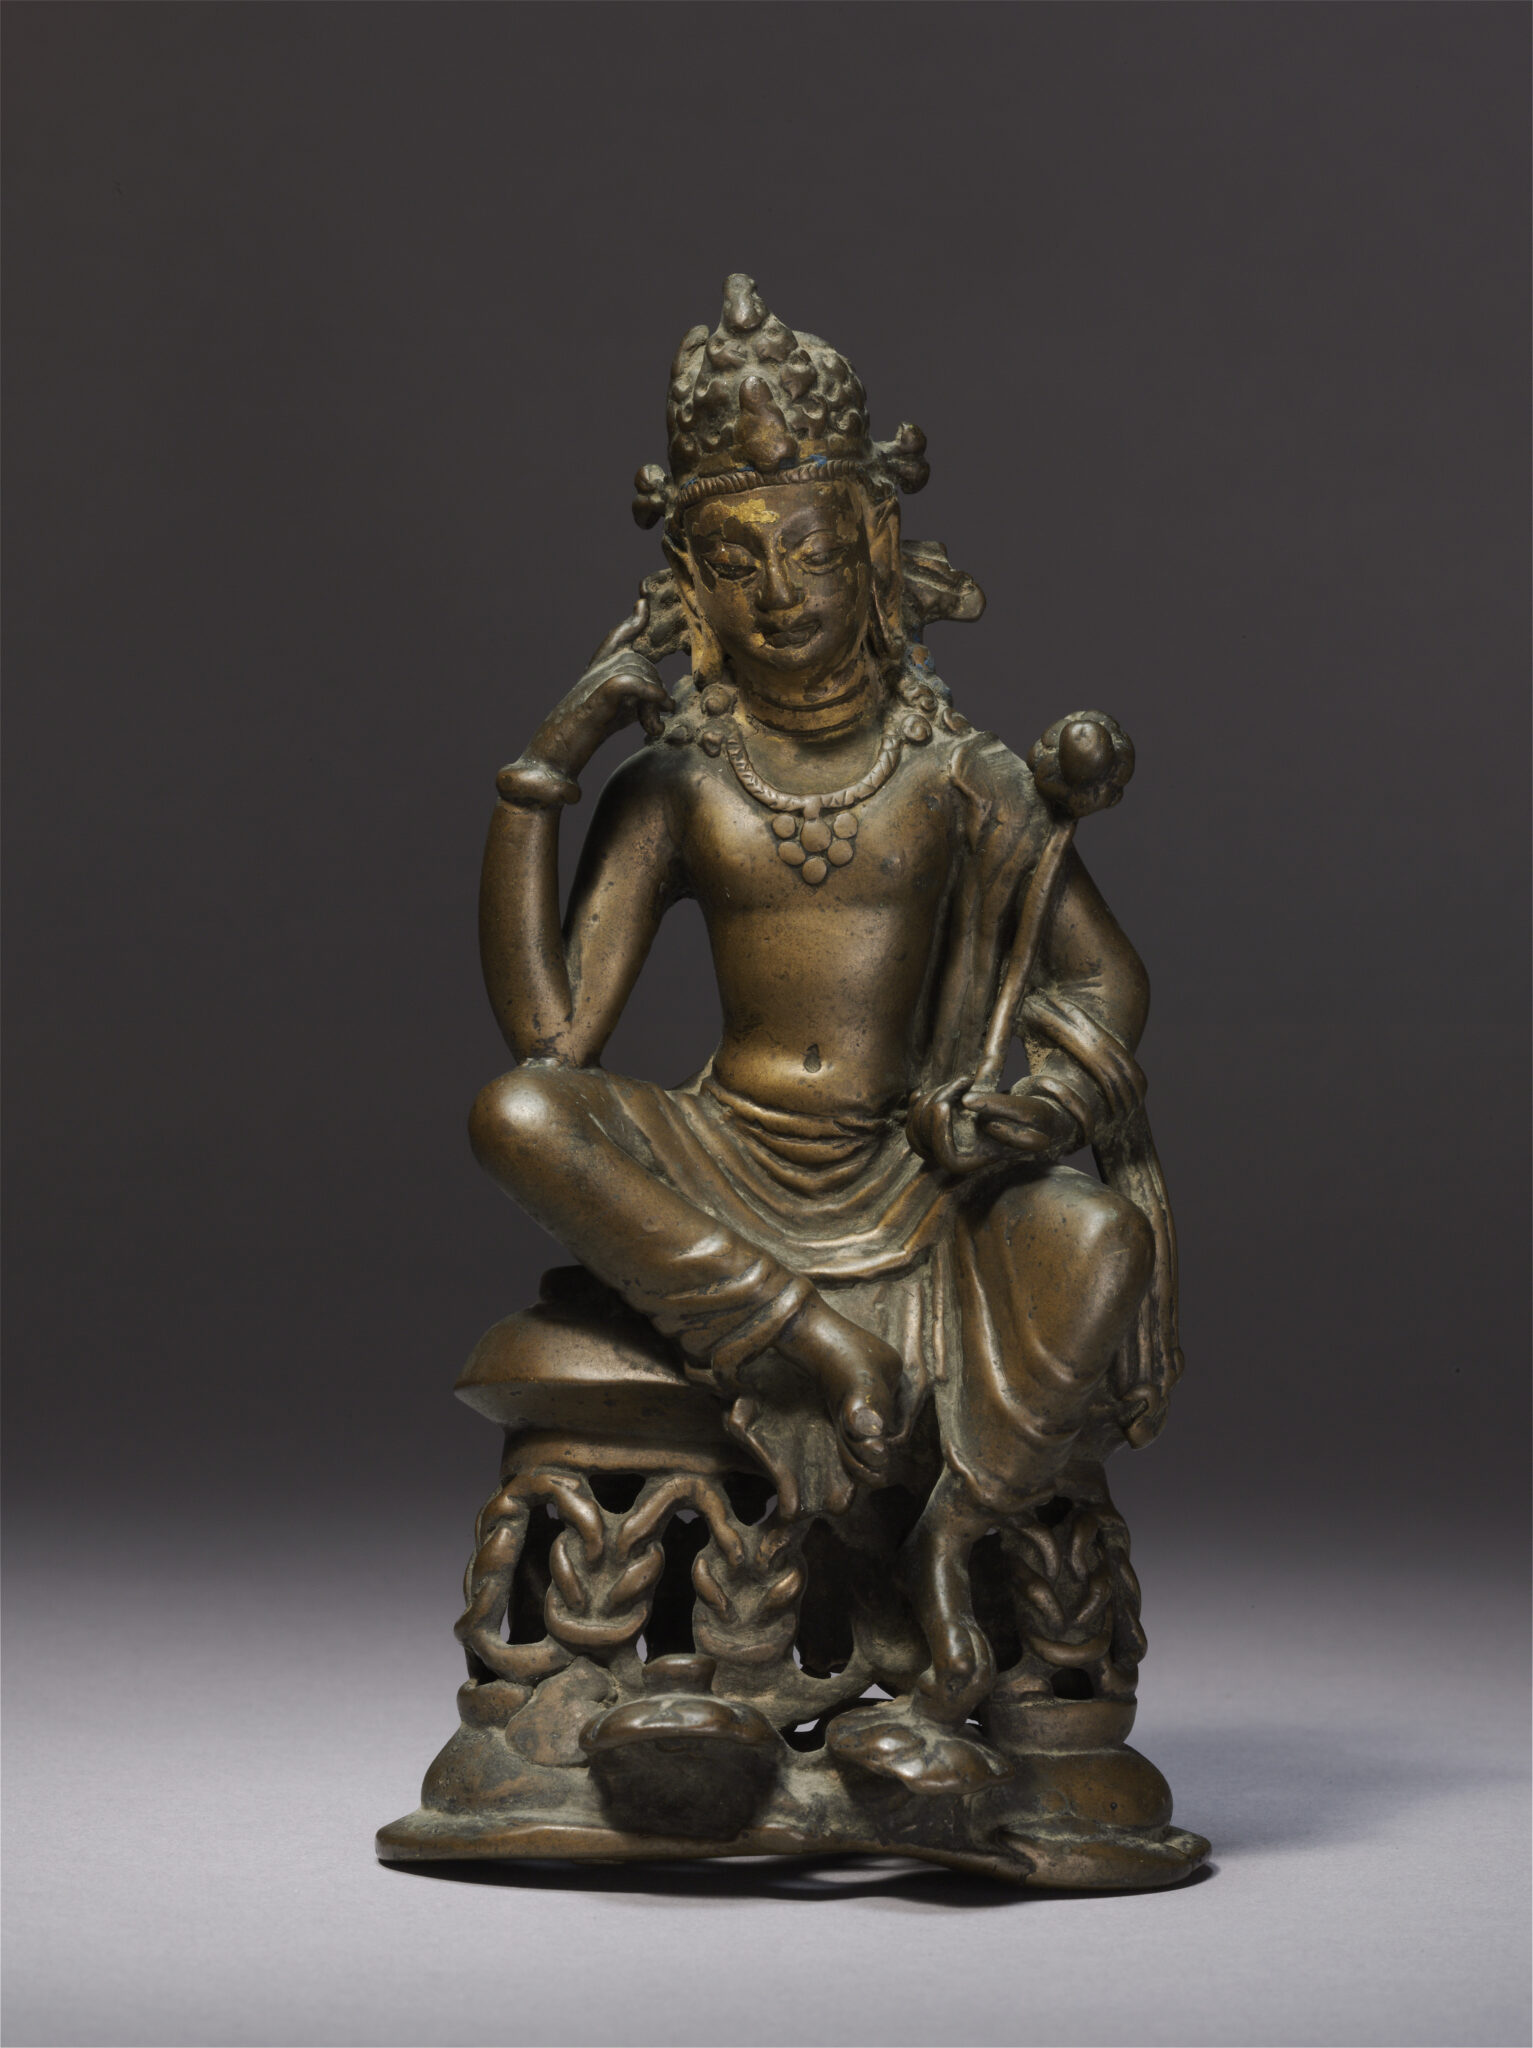 Statuette depicting Bodhisattva, legs half-uncrossed, holding symbolic implement in right hand and left hand raised to cheek